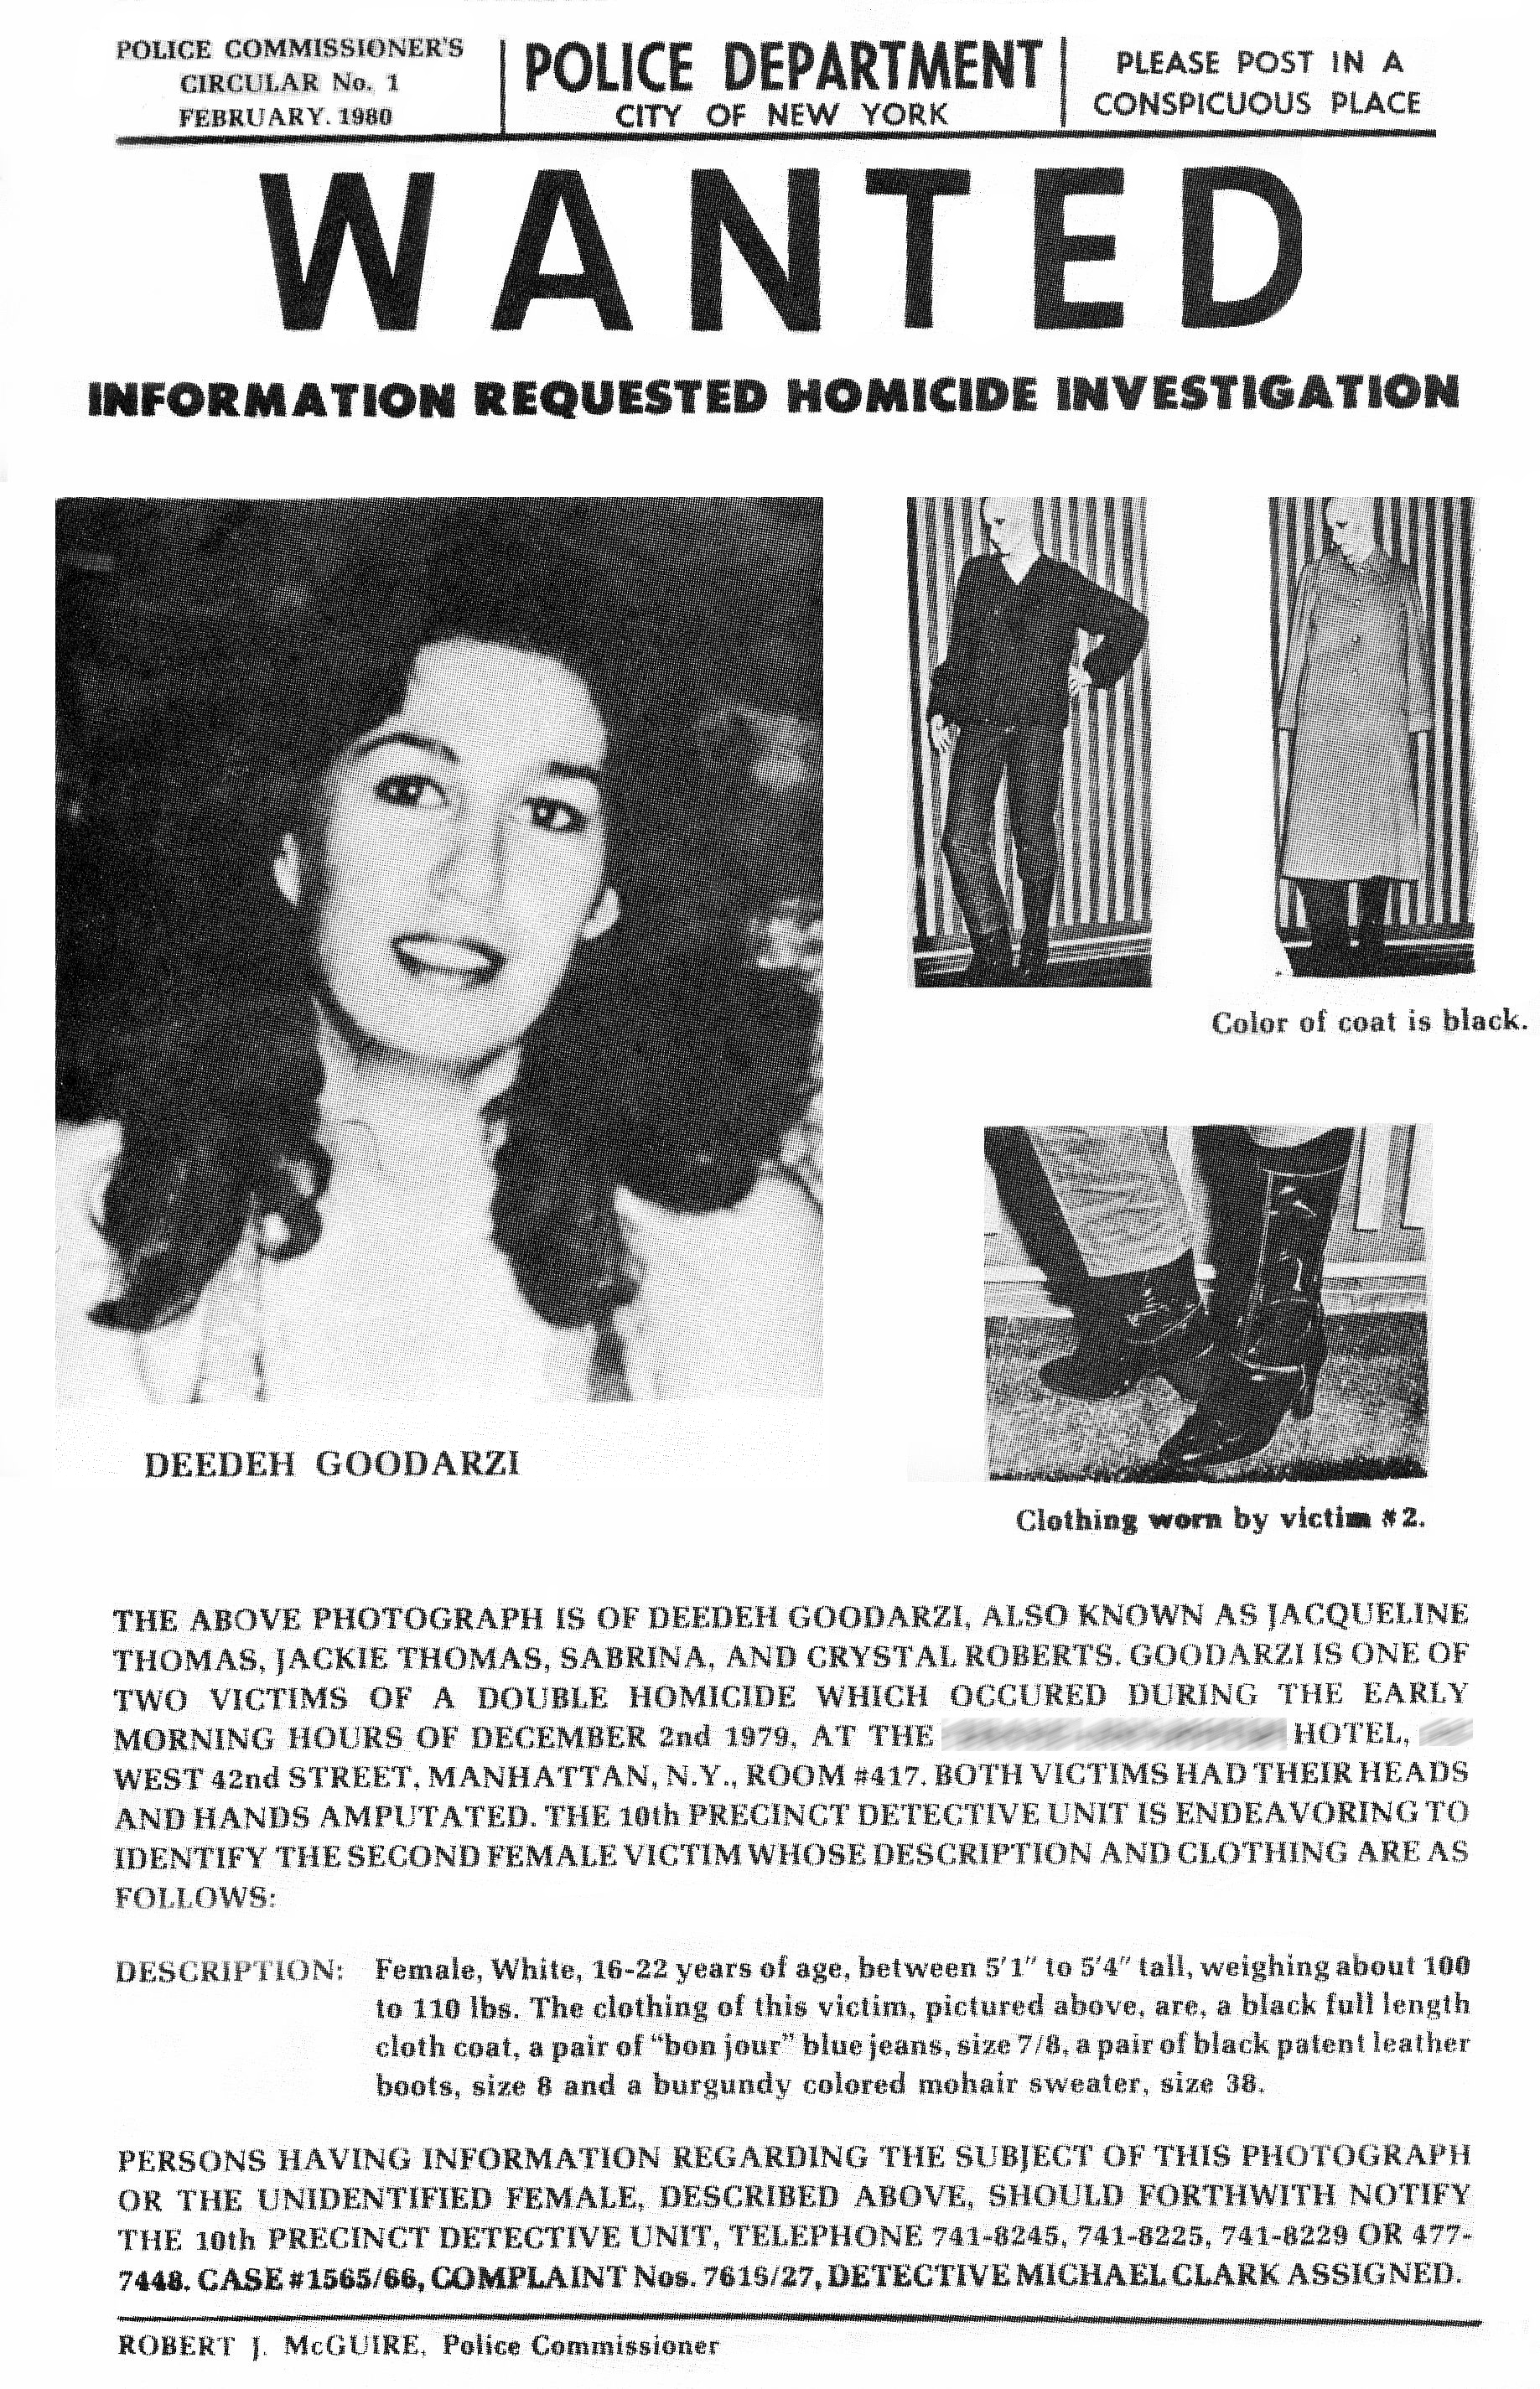 Times Square Torso Killer Richard Cottingham: Sex and Death on the Forty-Deuce by Peter Vronsky. The victims' severed heads were never found and one of the 1979 female victims remains unidentified to